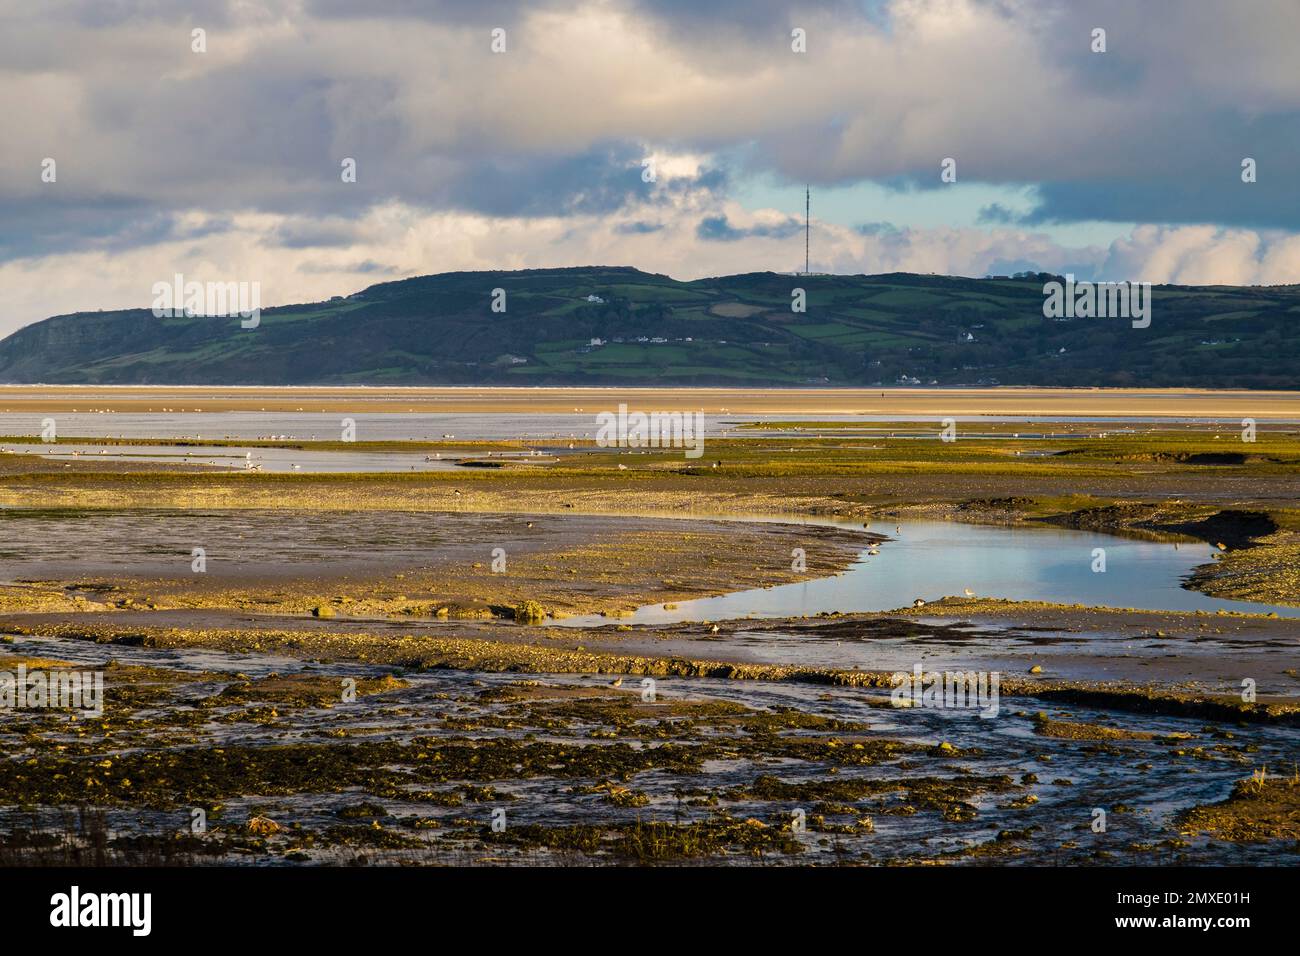 Ducks and wading birds feed in the tidal mudflats as the tide comes in to Red Wharf Bay (Traeth Coch) Benllech Isle of Anglesey (Ynys Mon) Wales UK Stock Photo